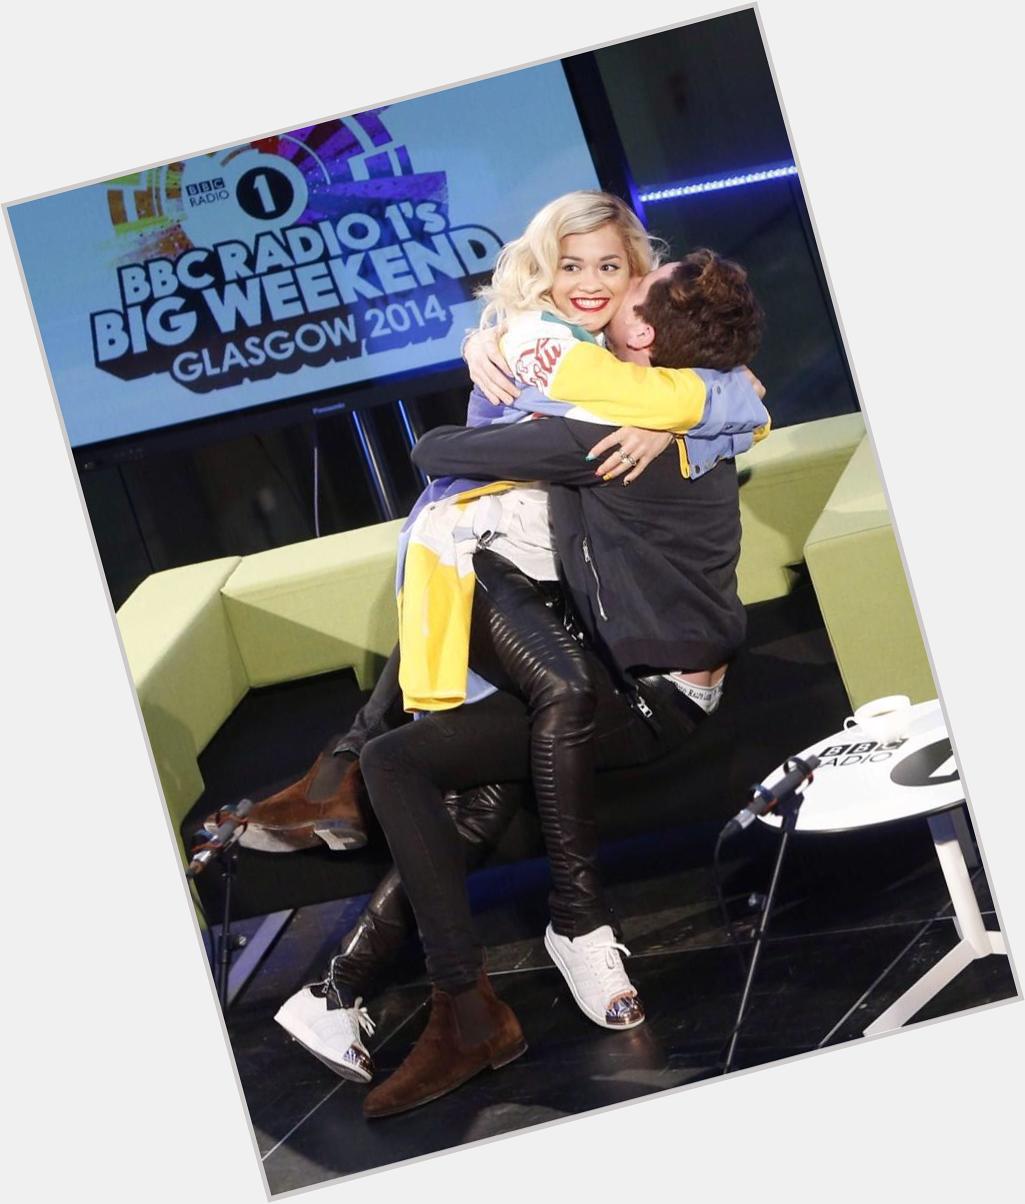 Happy birthday Nick Grimshaw!! . This picture is my favourite of Rita&Nick, it\s just too cute!   